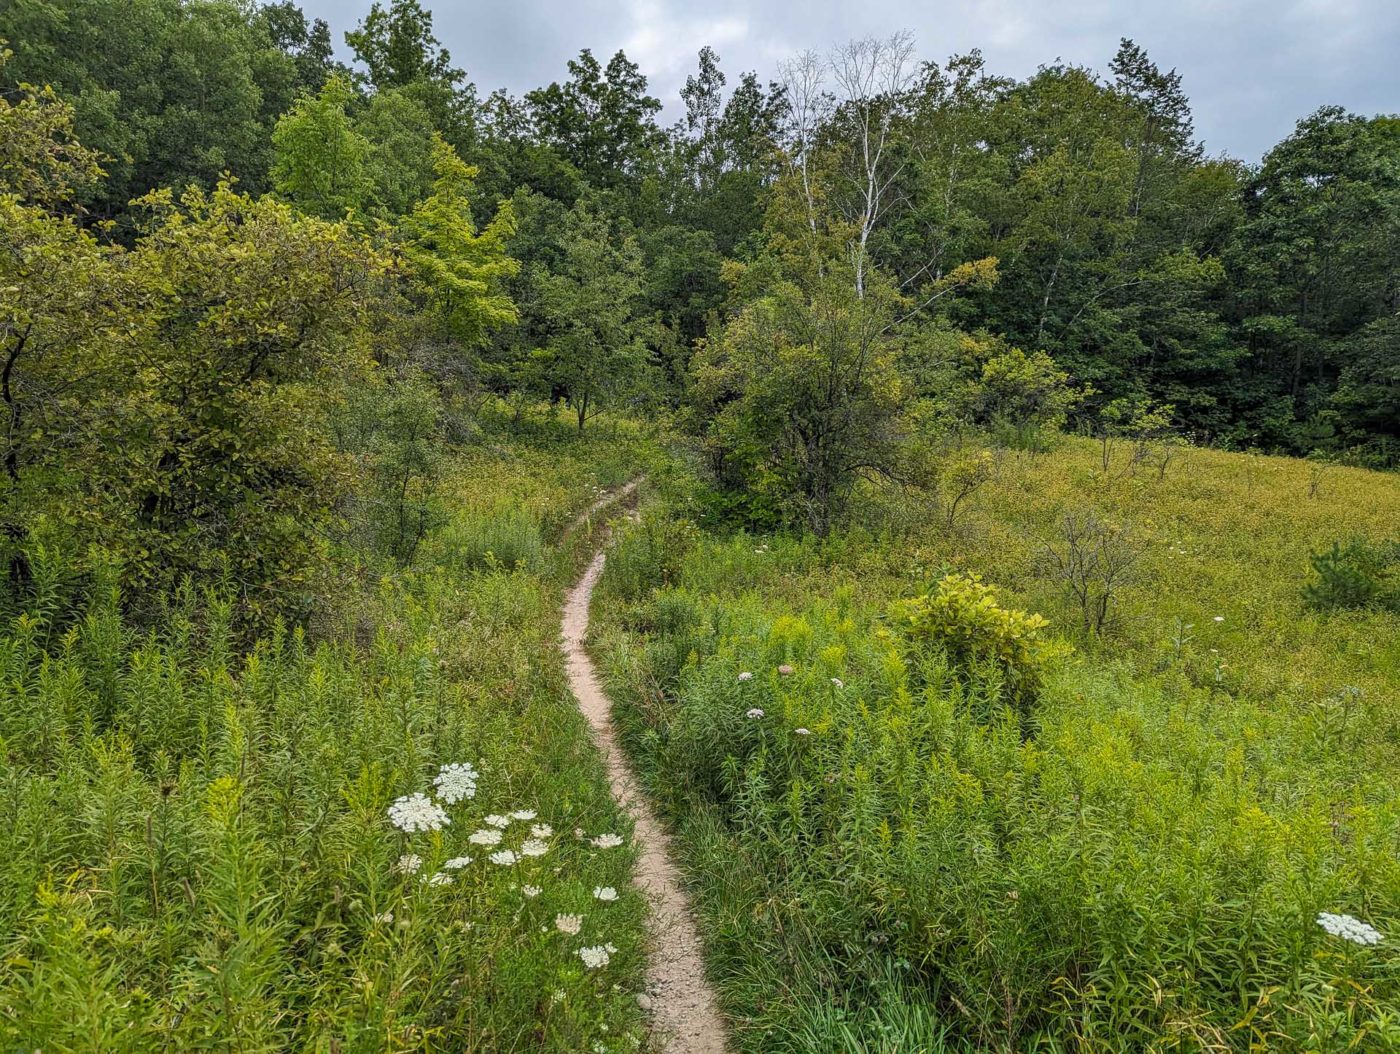 A trail through a grassy area with wildflowers.